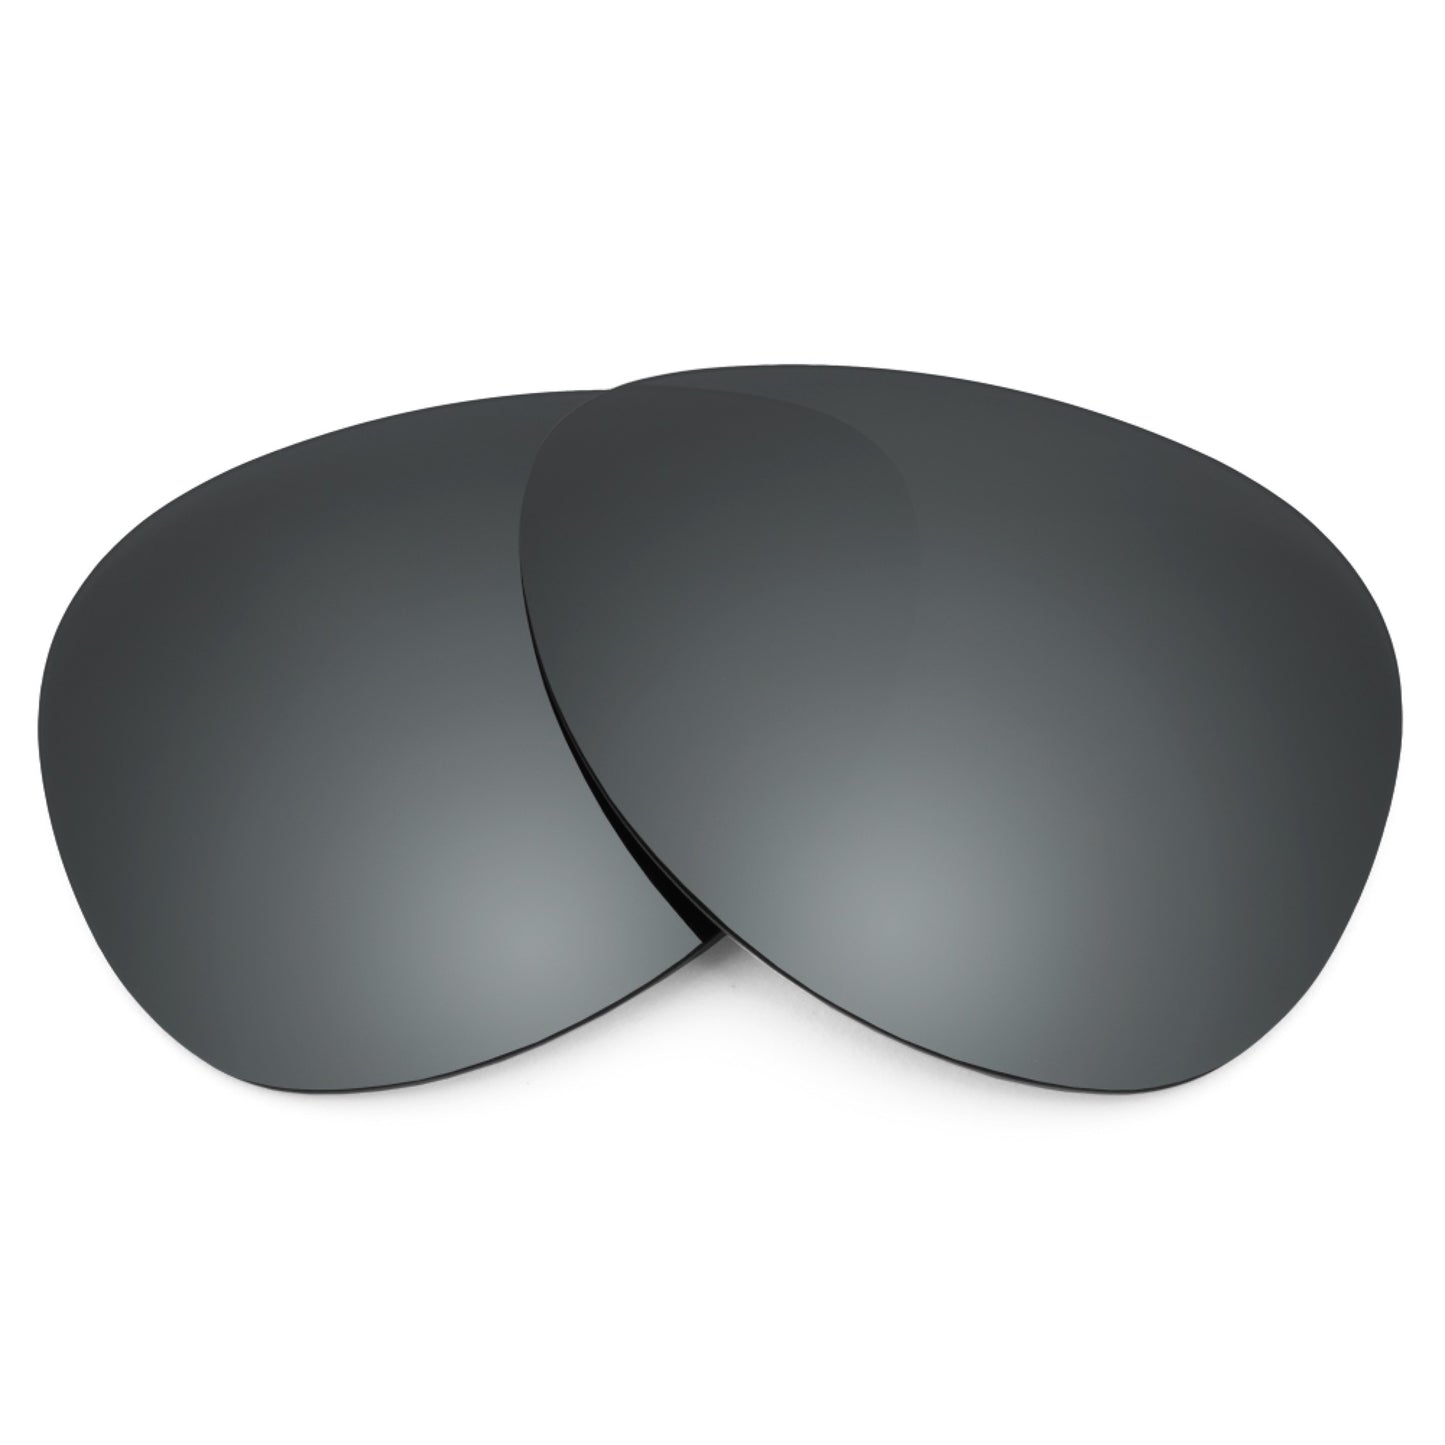 Revant replacement lenses for Ray-Ban Jackie Ohh RB4101 58mm Polarized Black Chrome